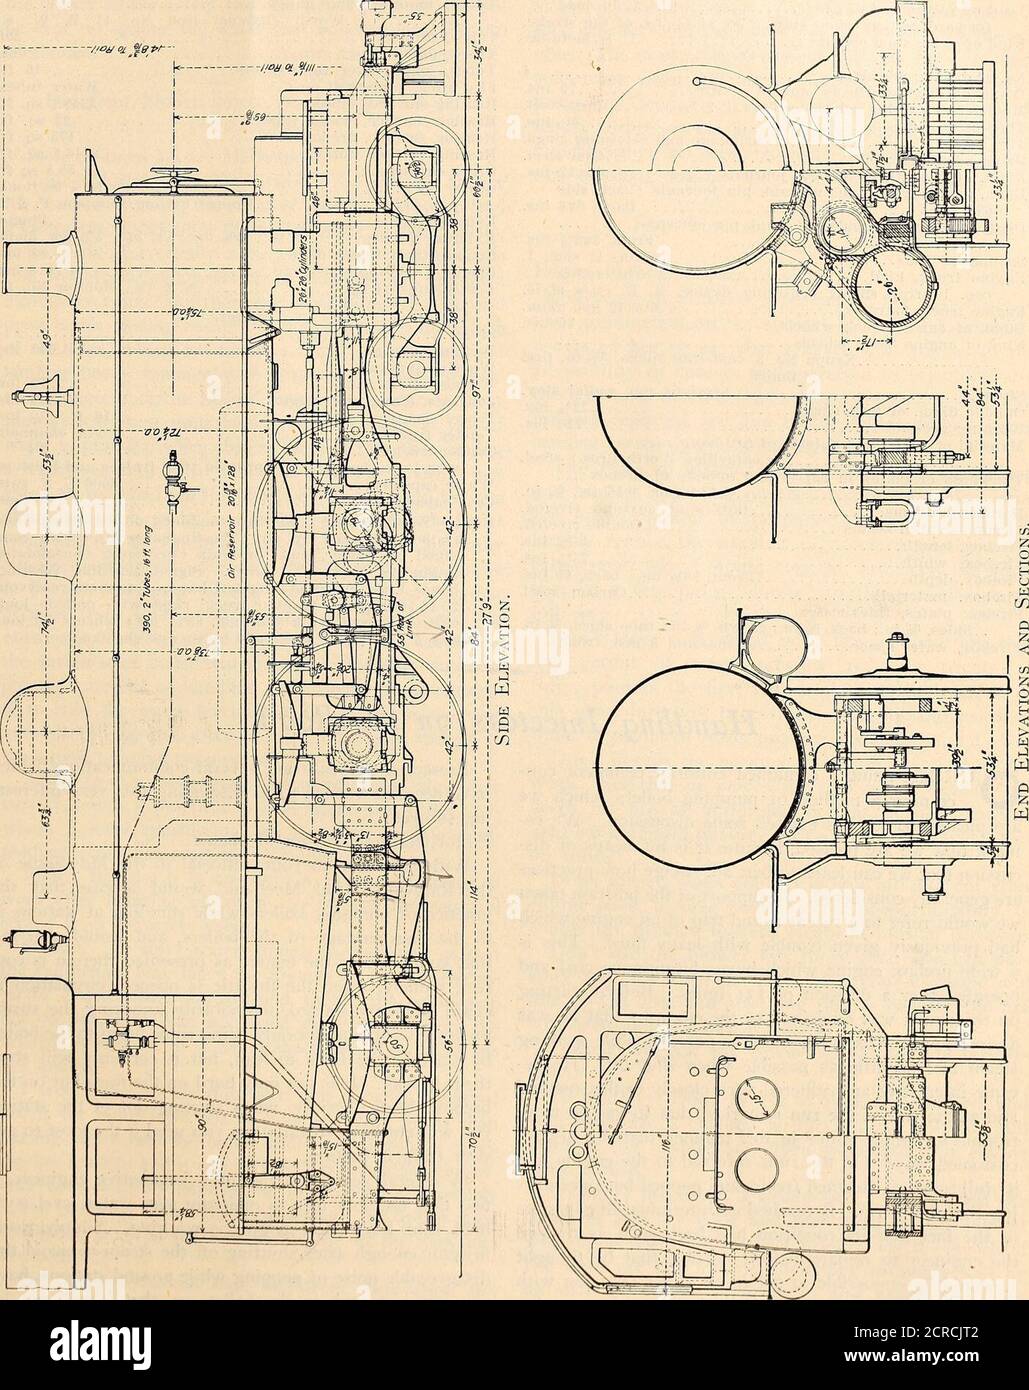 . Railway master mechanic [microform] . June, 1904. RAILWAY MASTER MECHANIC 201. 202 RAILWAY MASTER MECHANIC June, 1904. Greatest travel of slide valves 6 ins. Outside lap of slide valves 1 in. Inside clearance of slide valves. / H. P. % in., L. P. % in. Lead of valves in full gear &lt; % in. lead forward motion when cutting off at 11 ins. of the stroke. Kind of valve stem packing U. S. metallic. Wheels, Etc. No. of driving wheels 4 Diam. of driving wheels outside of tire 79 ins. Material of driving wheel, centers ...... .Cast steel. Thickness of tire 3% ins. Tire held by Shrinkage and retaini Stock Photo